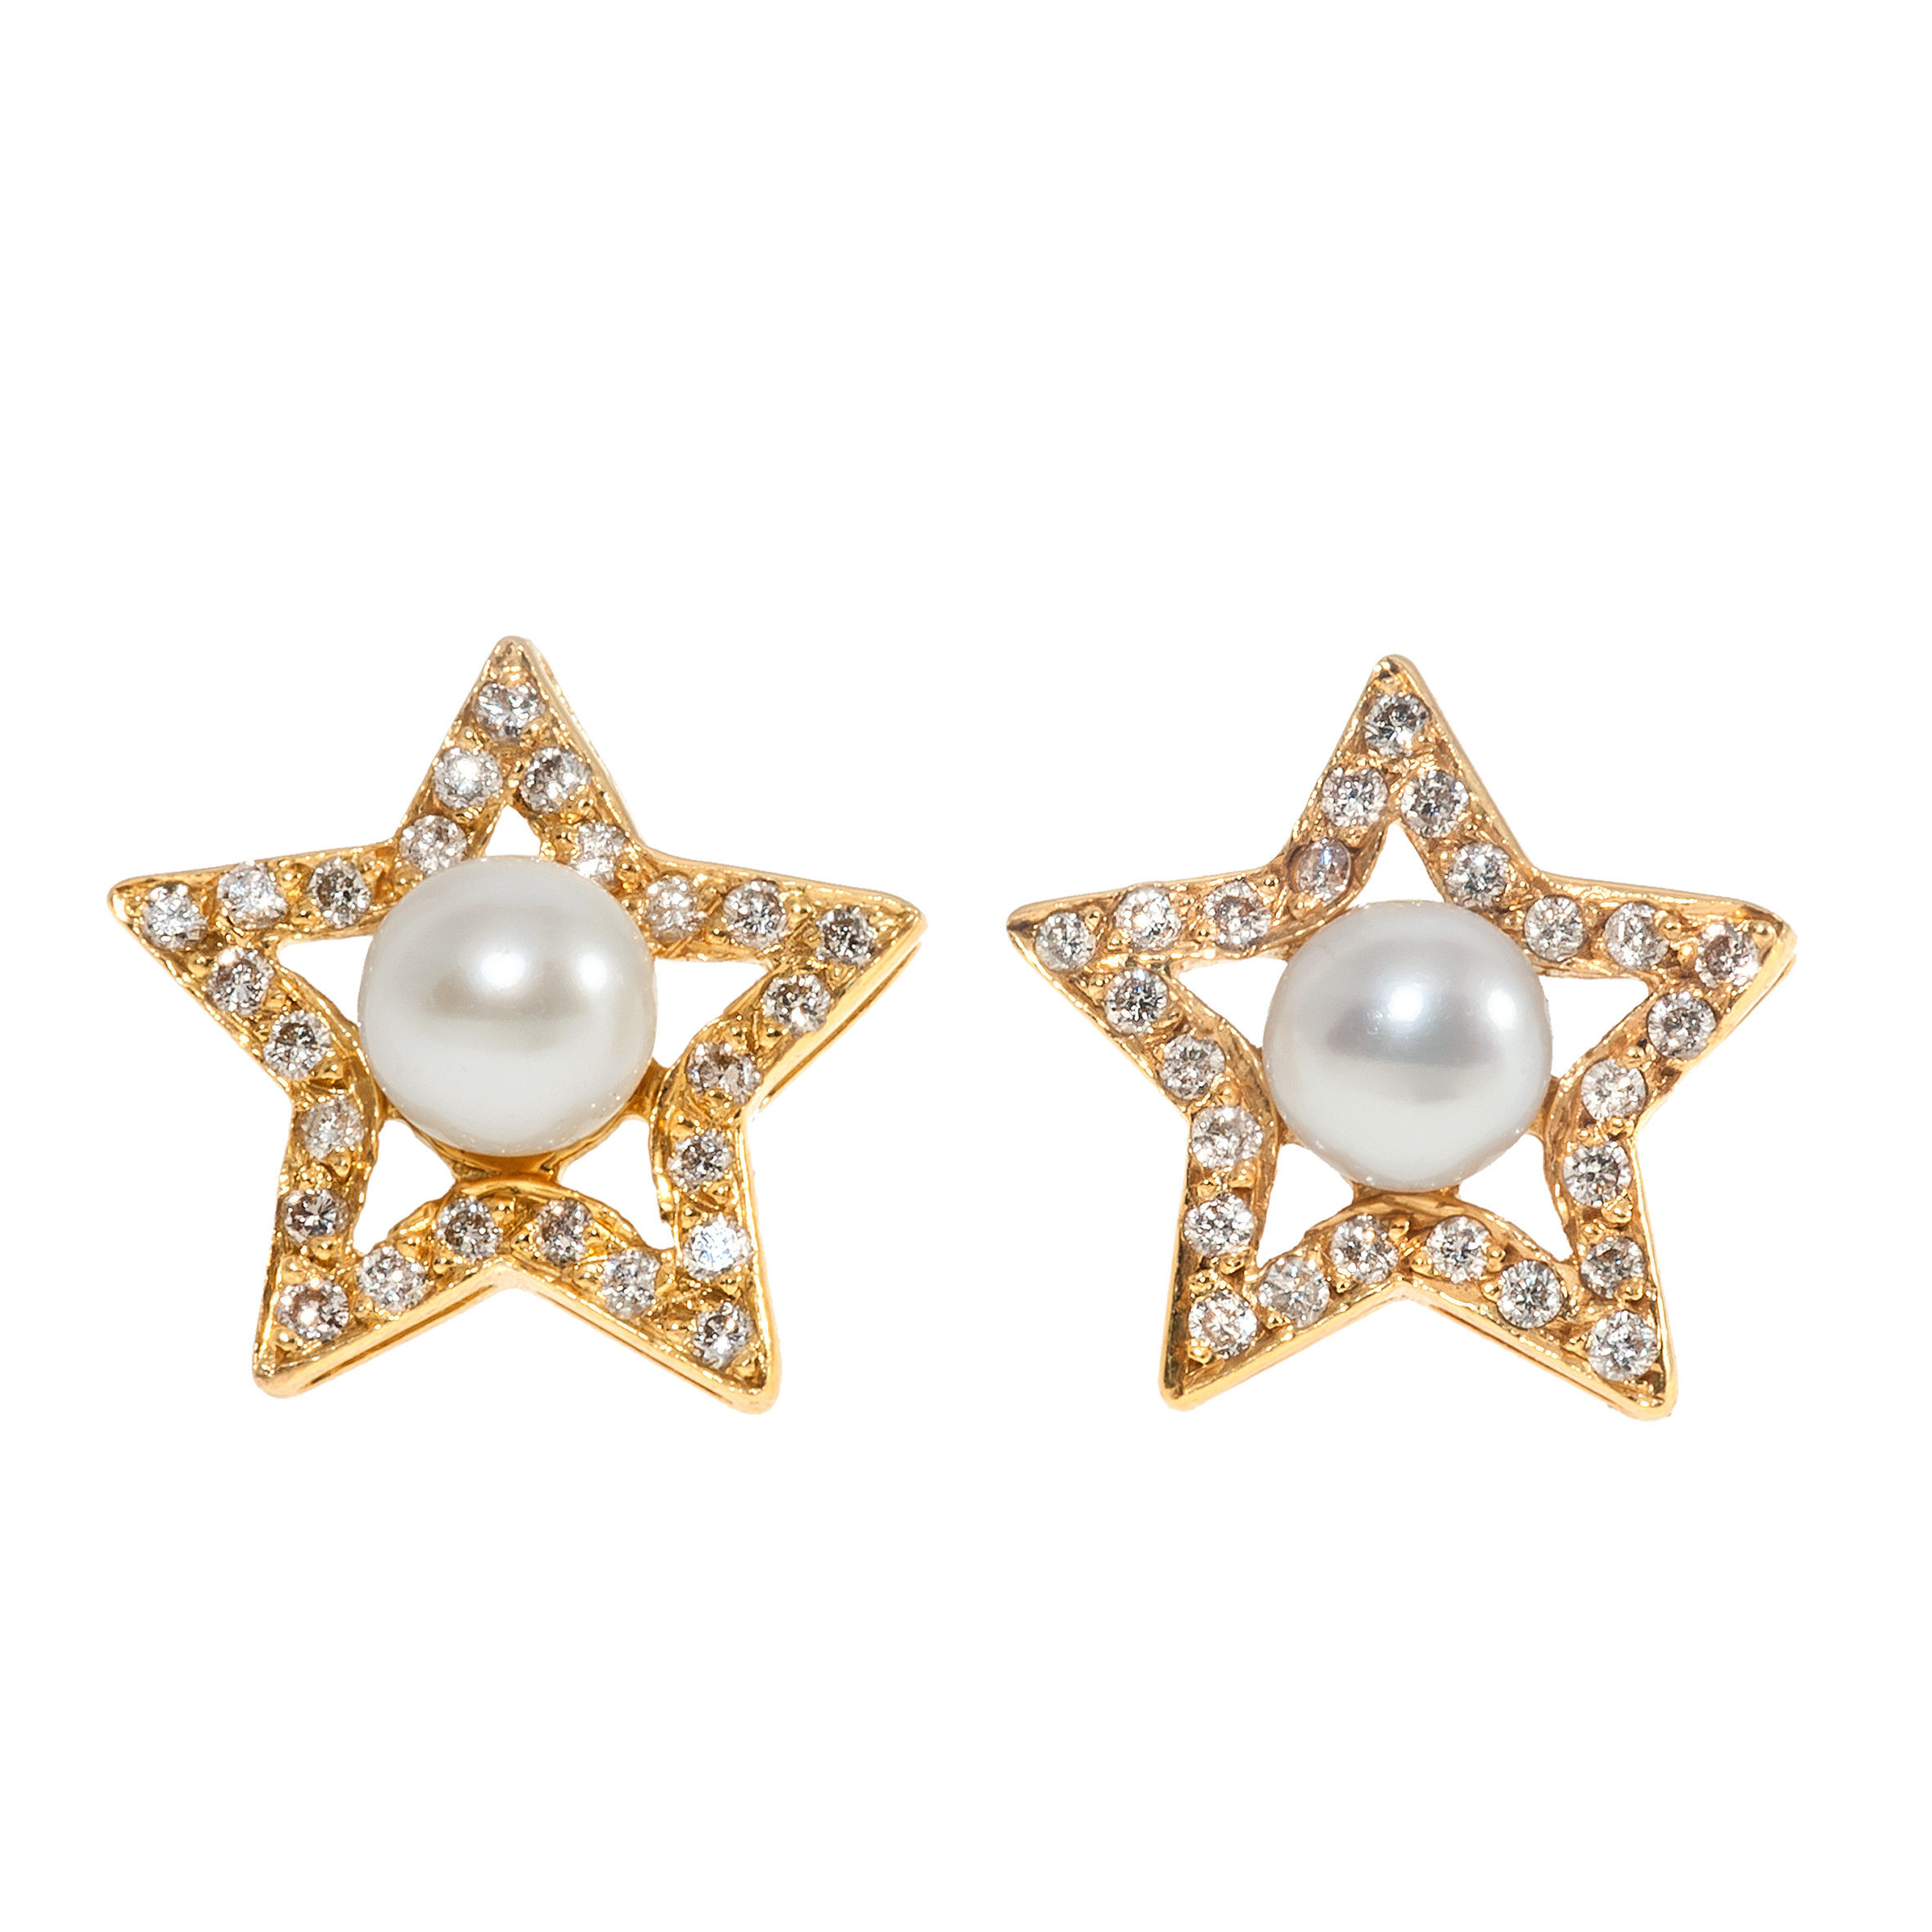 Star earrings, 18K yellow gold set with brilliant-cut diamonds and button shaped pearls